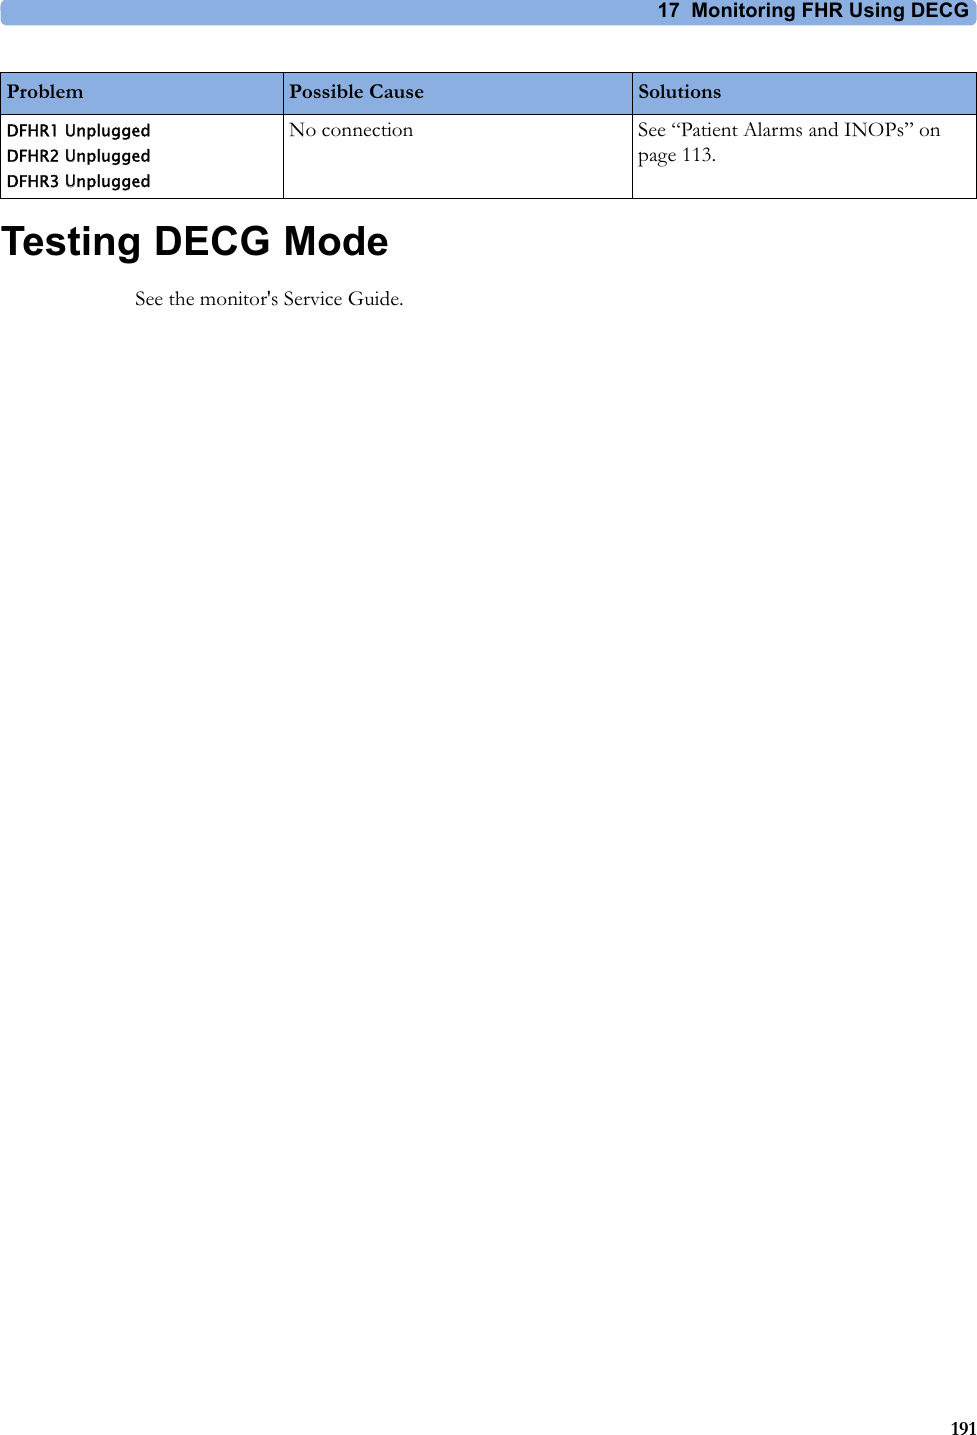 17  Monitoring FHR Using DECG191Testing DECG ModeSee the monitor&apos;s Service Guide.DFHR1 Unplugged DFHR2 Unplugged DFHR3 UnpluggedNo connection See “Patient Alarms and INOPs” on page 113.Problem Possible Cause Solutions